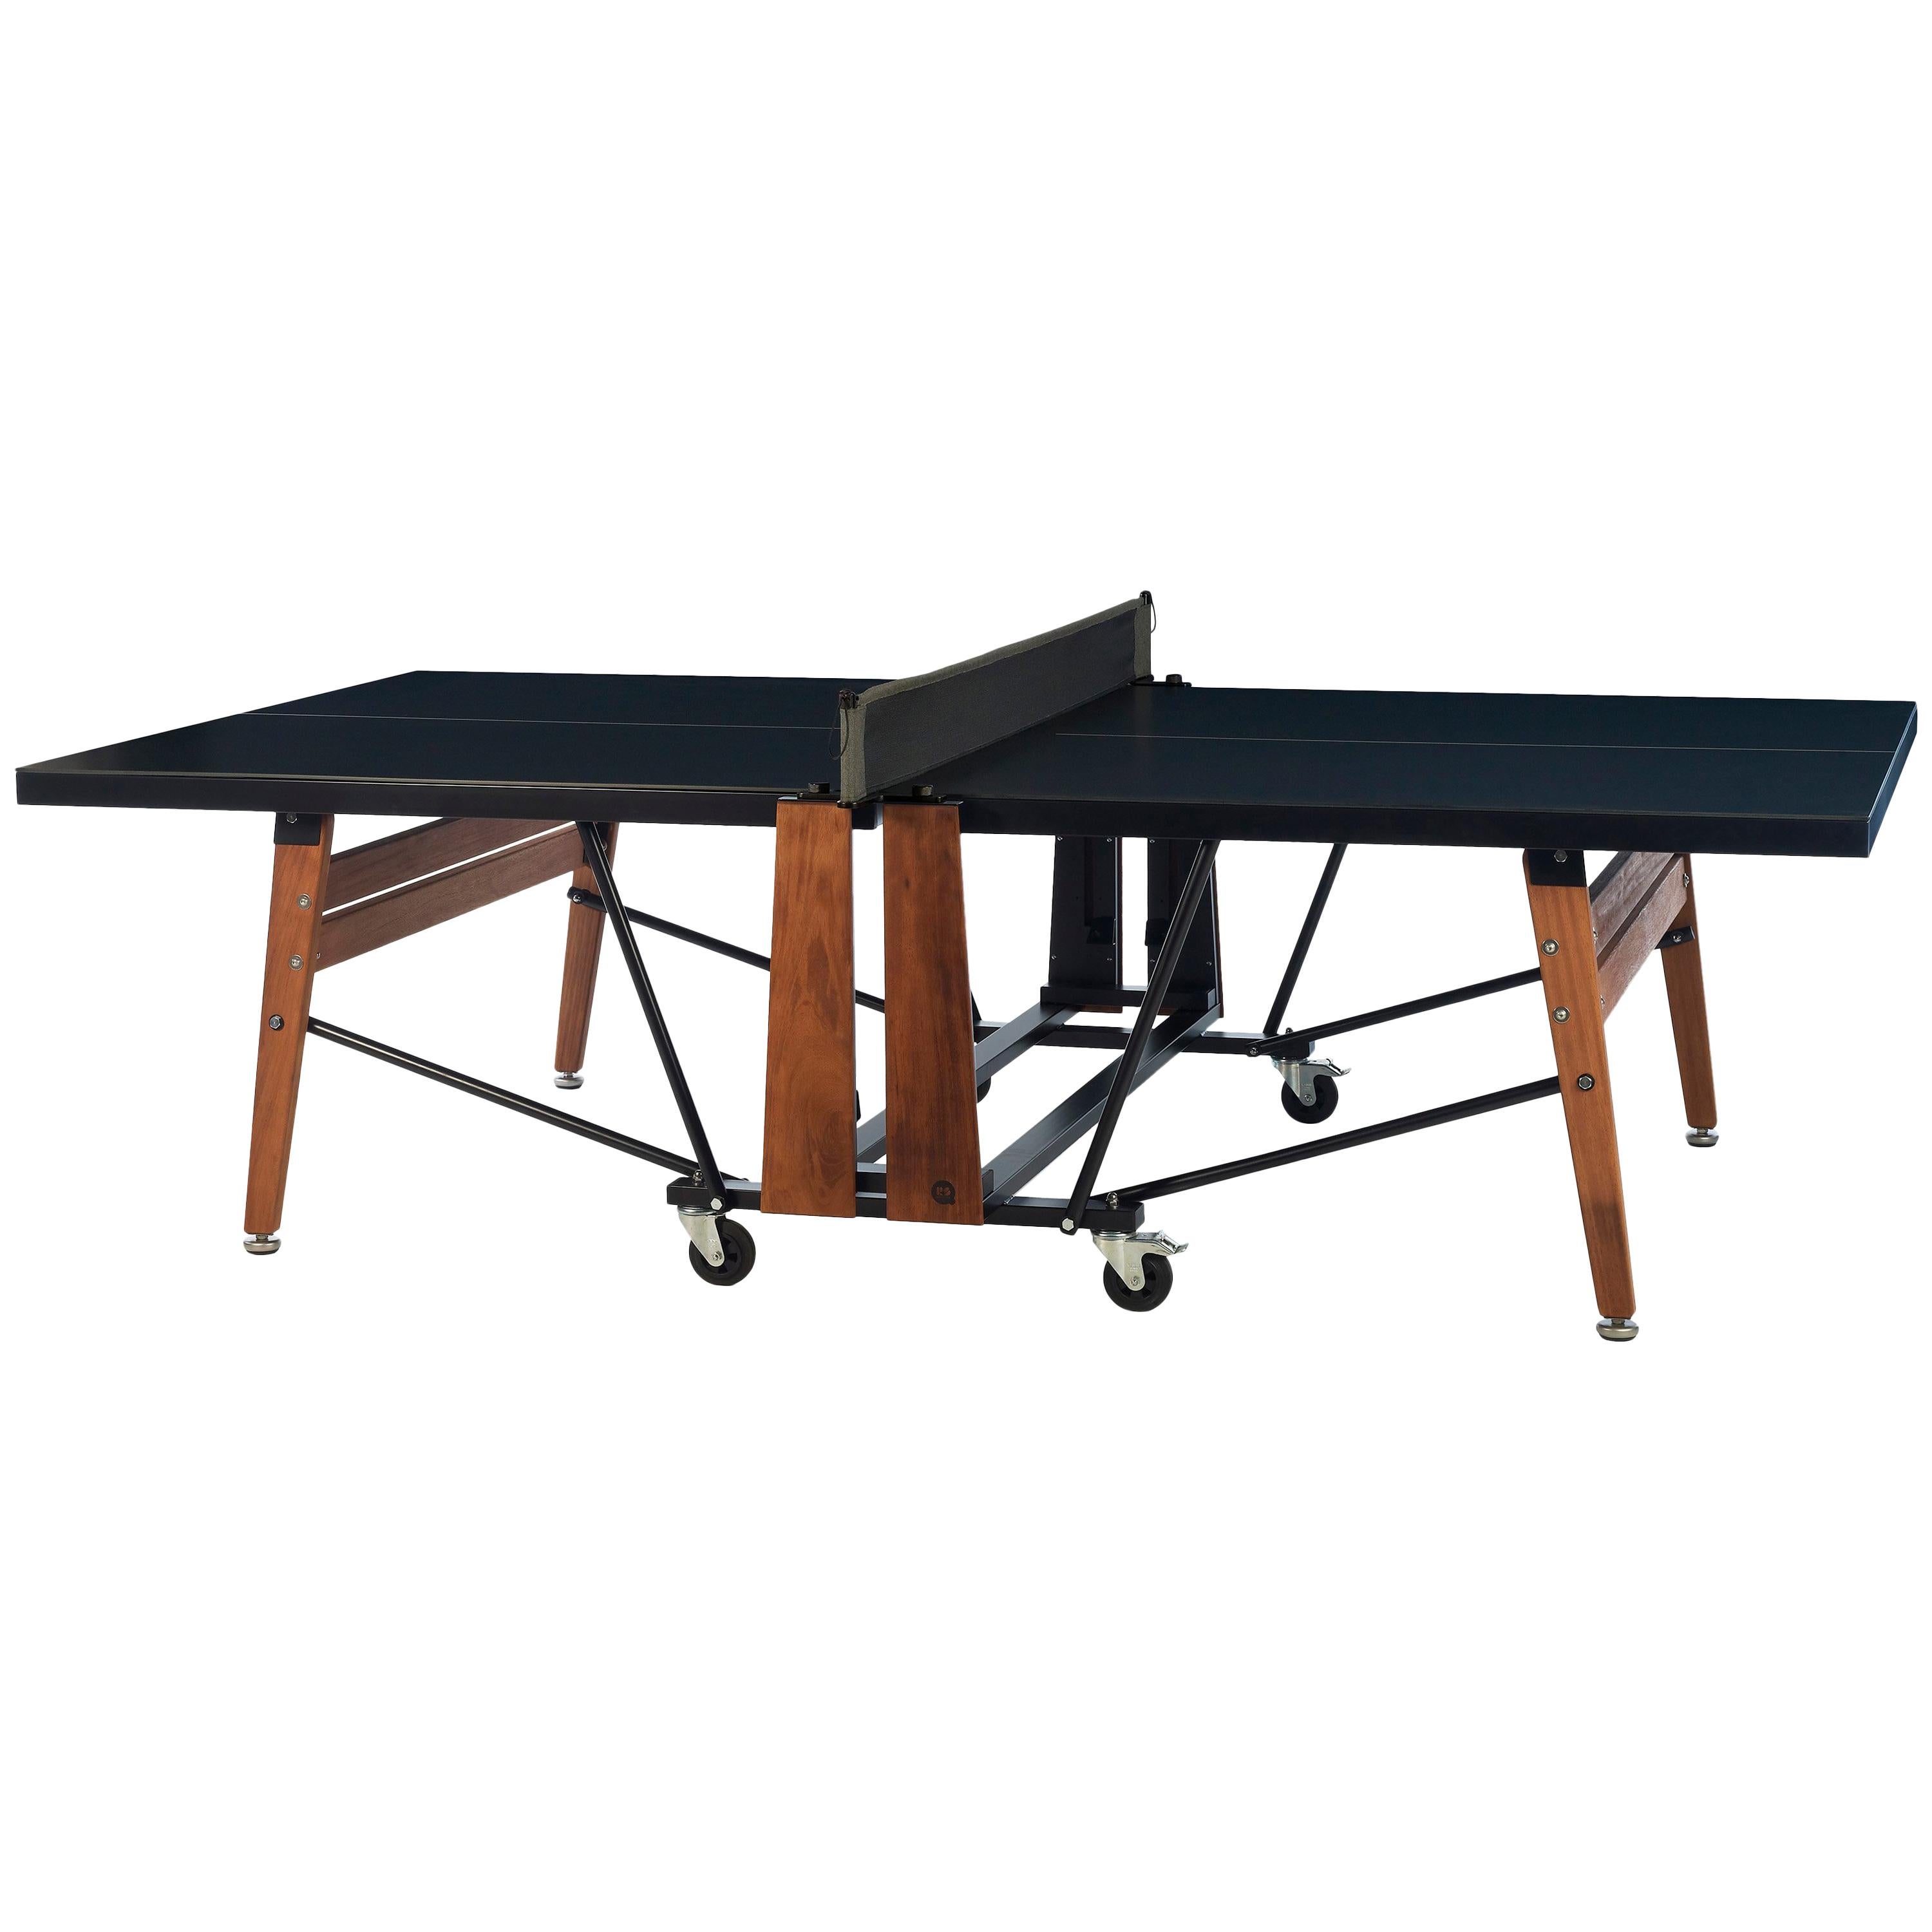 RS Barcelona Ping-Pong Folding Table in Black and Iroko by Rafael Rodriguez For Sale